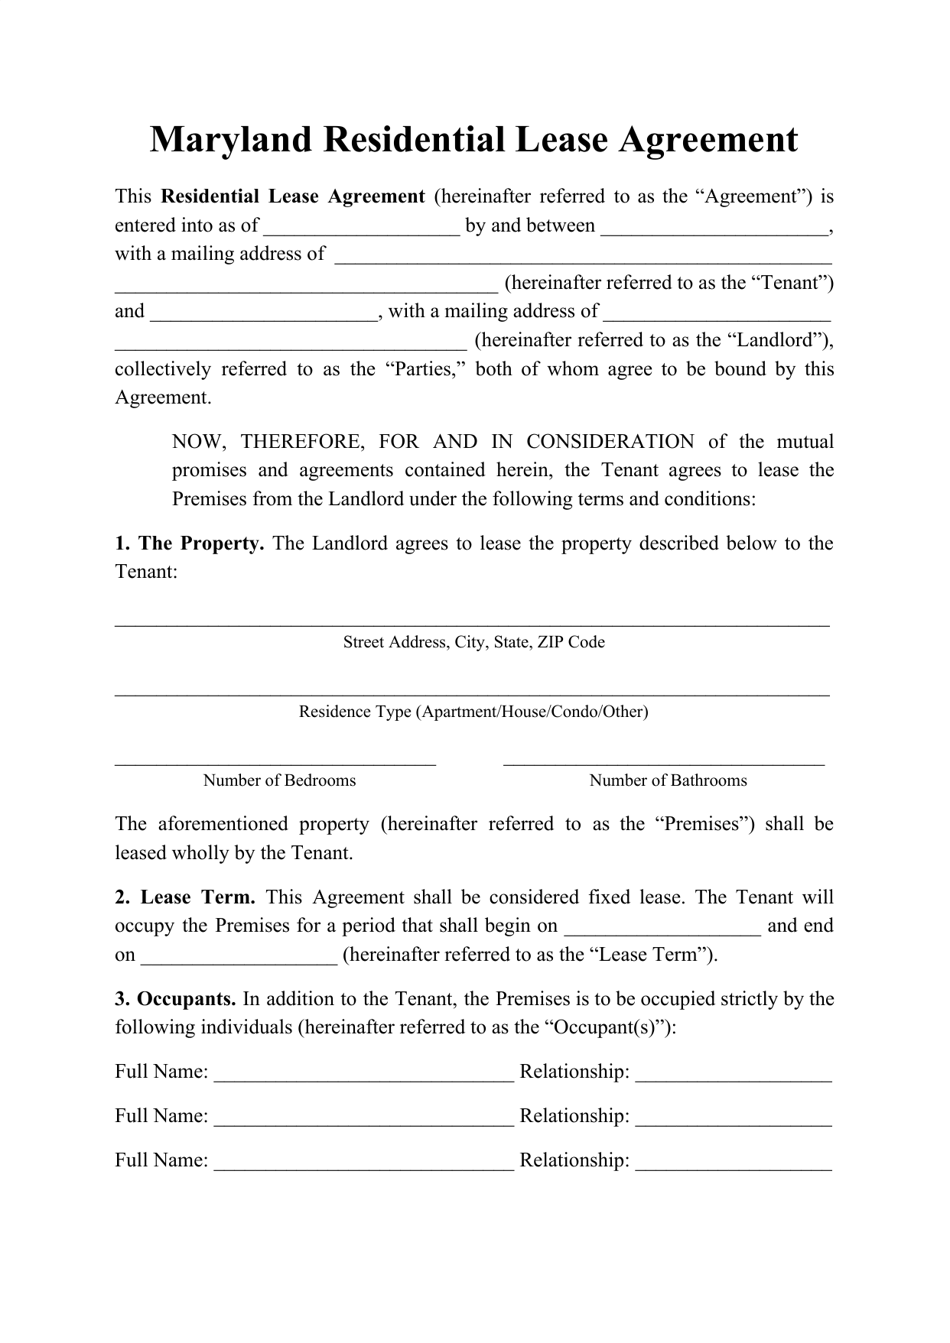 Maryland Residential Lease Agreement Template Fill Out, Sign Online